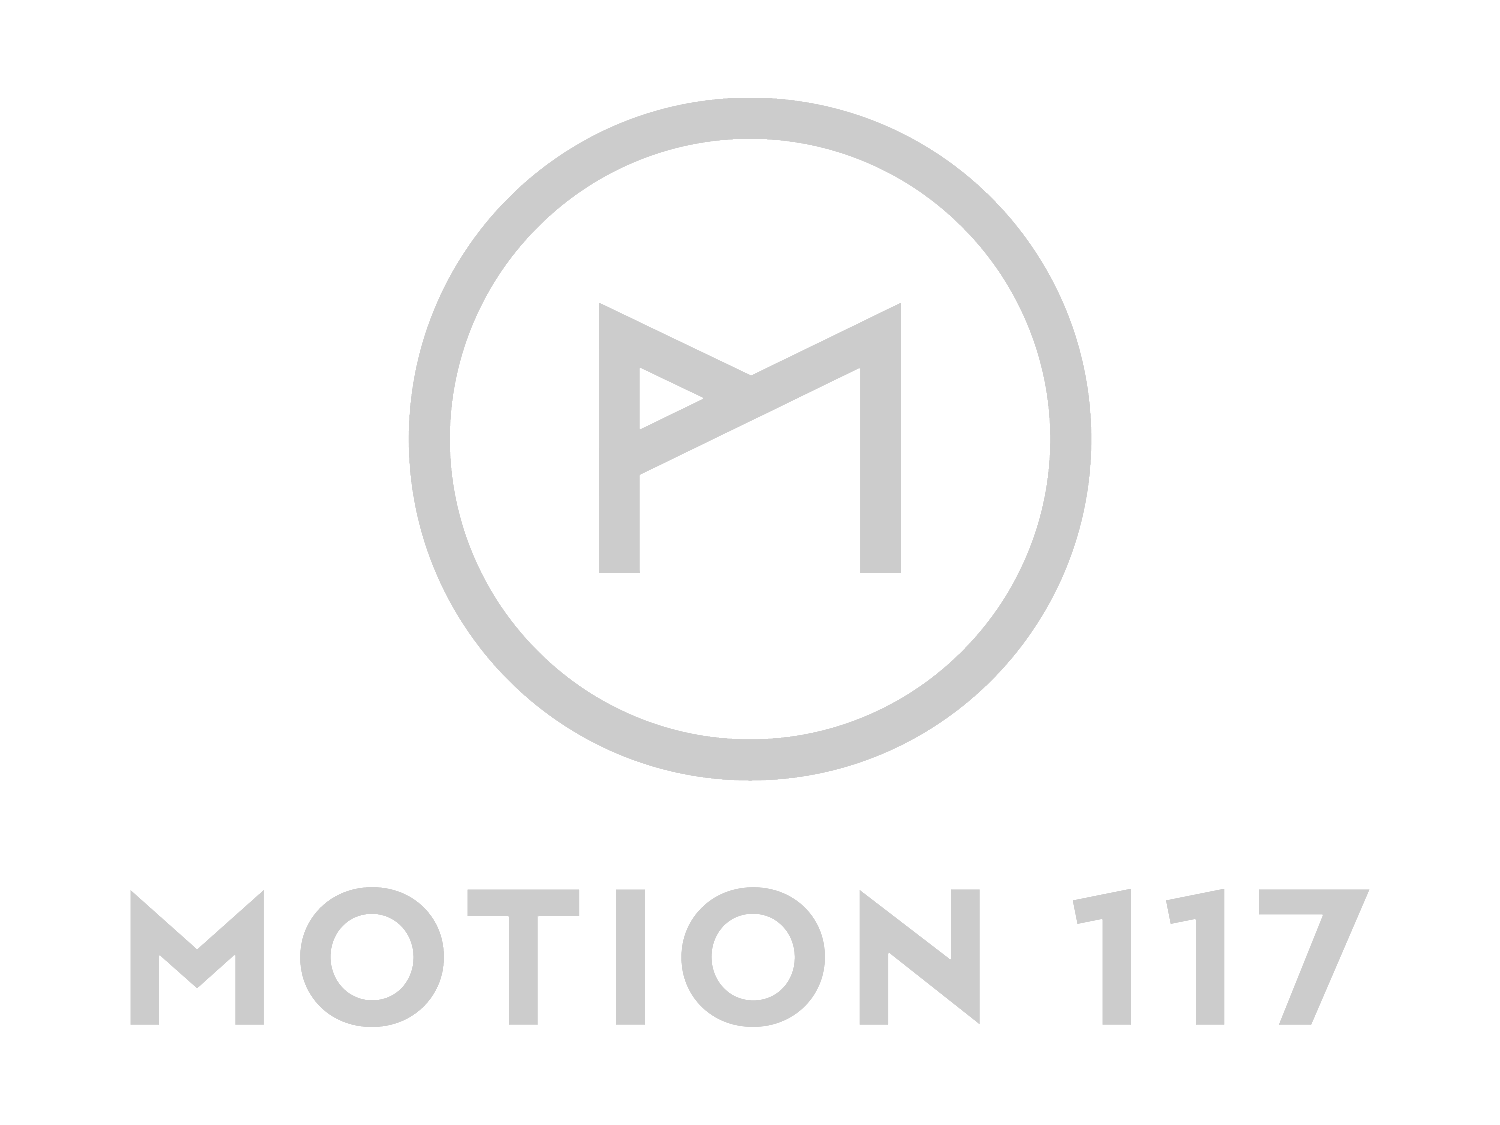 Motion 117 Productions